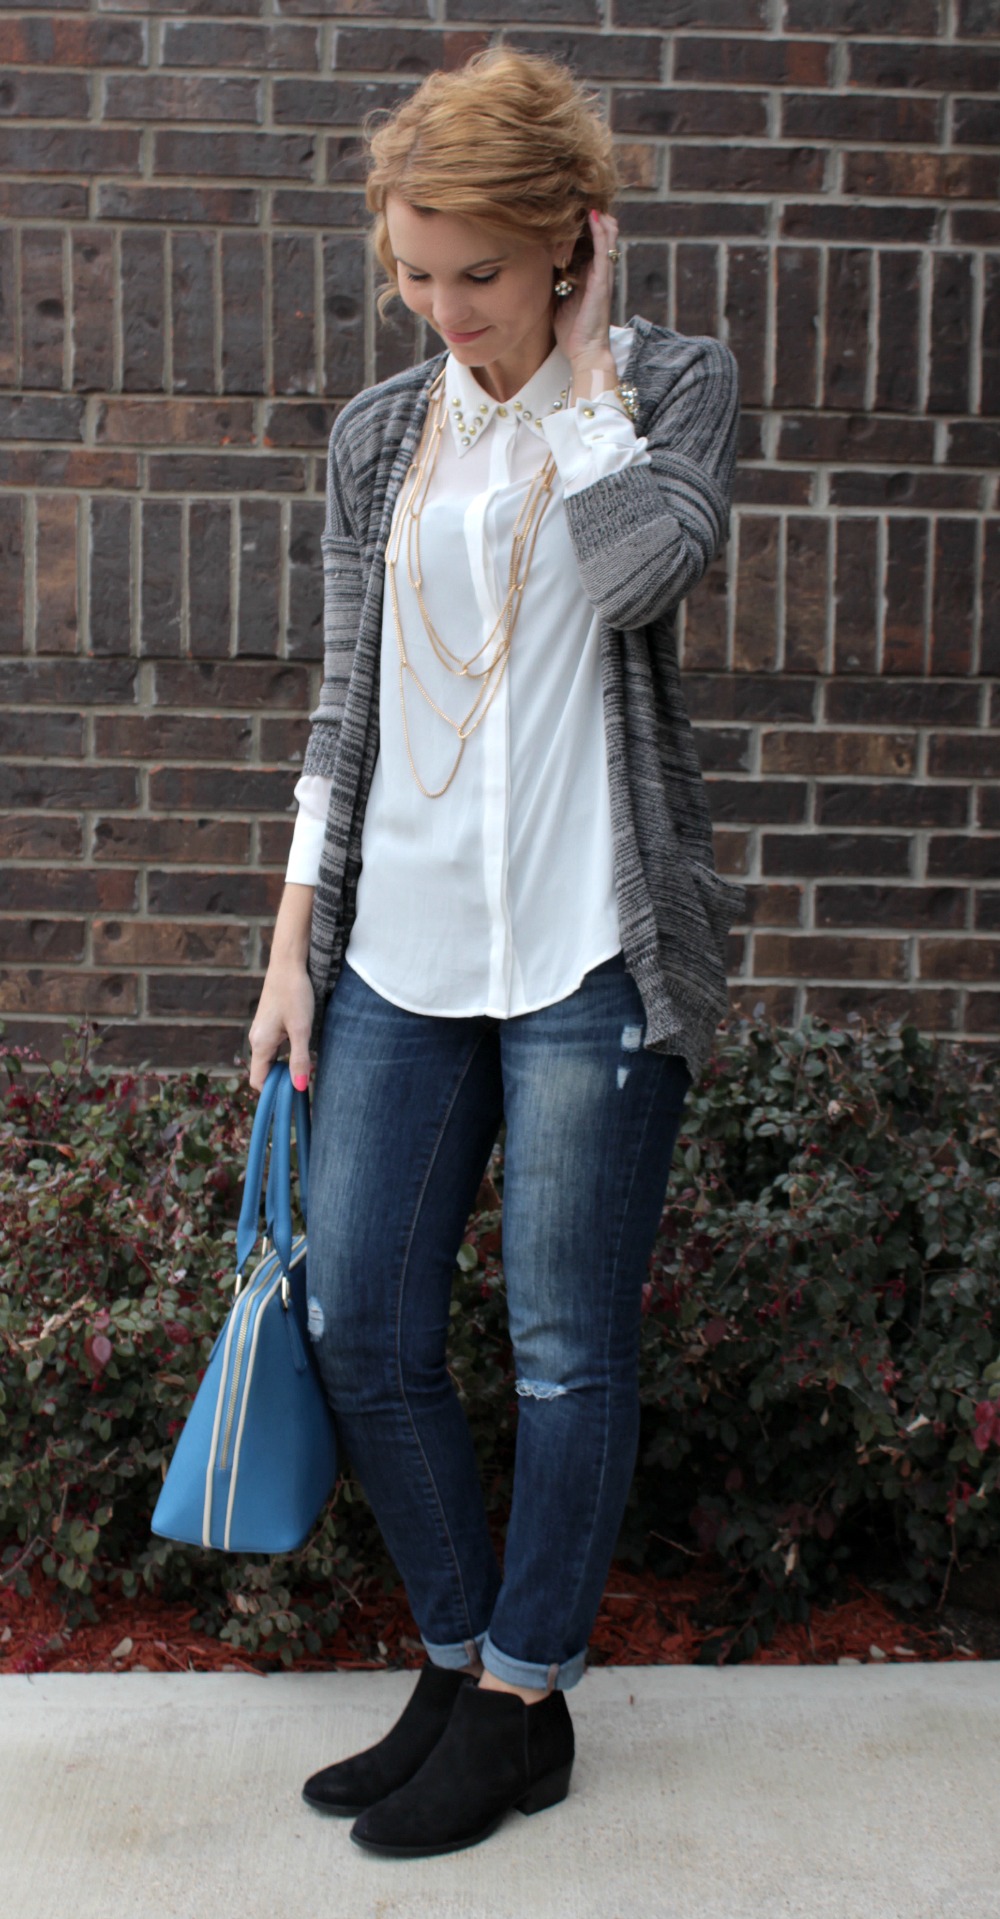 Outfit of the Day: Layering It Up with a Cardigan | Mom Fabulous